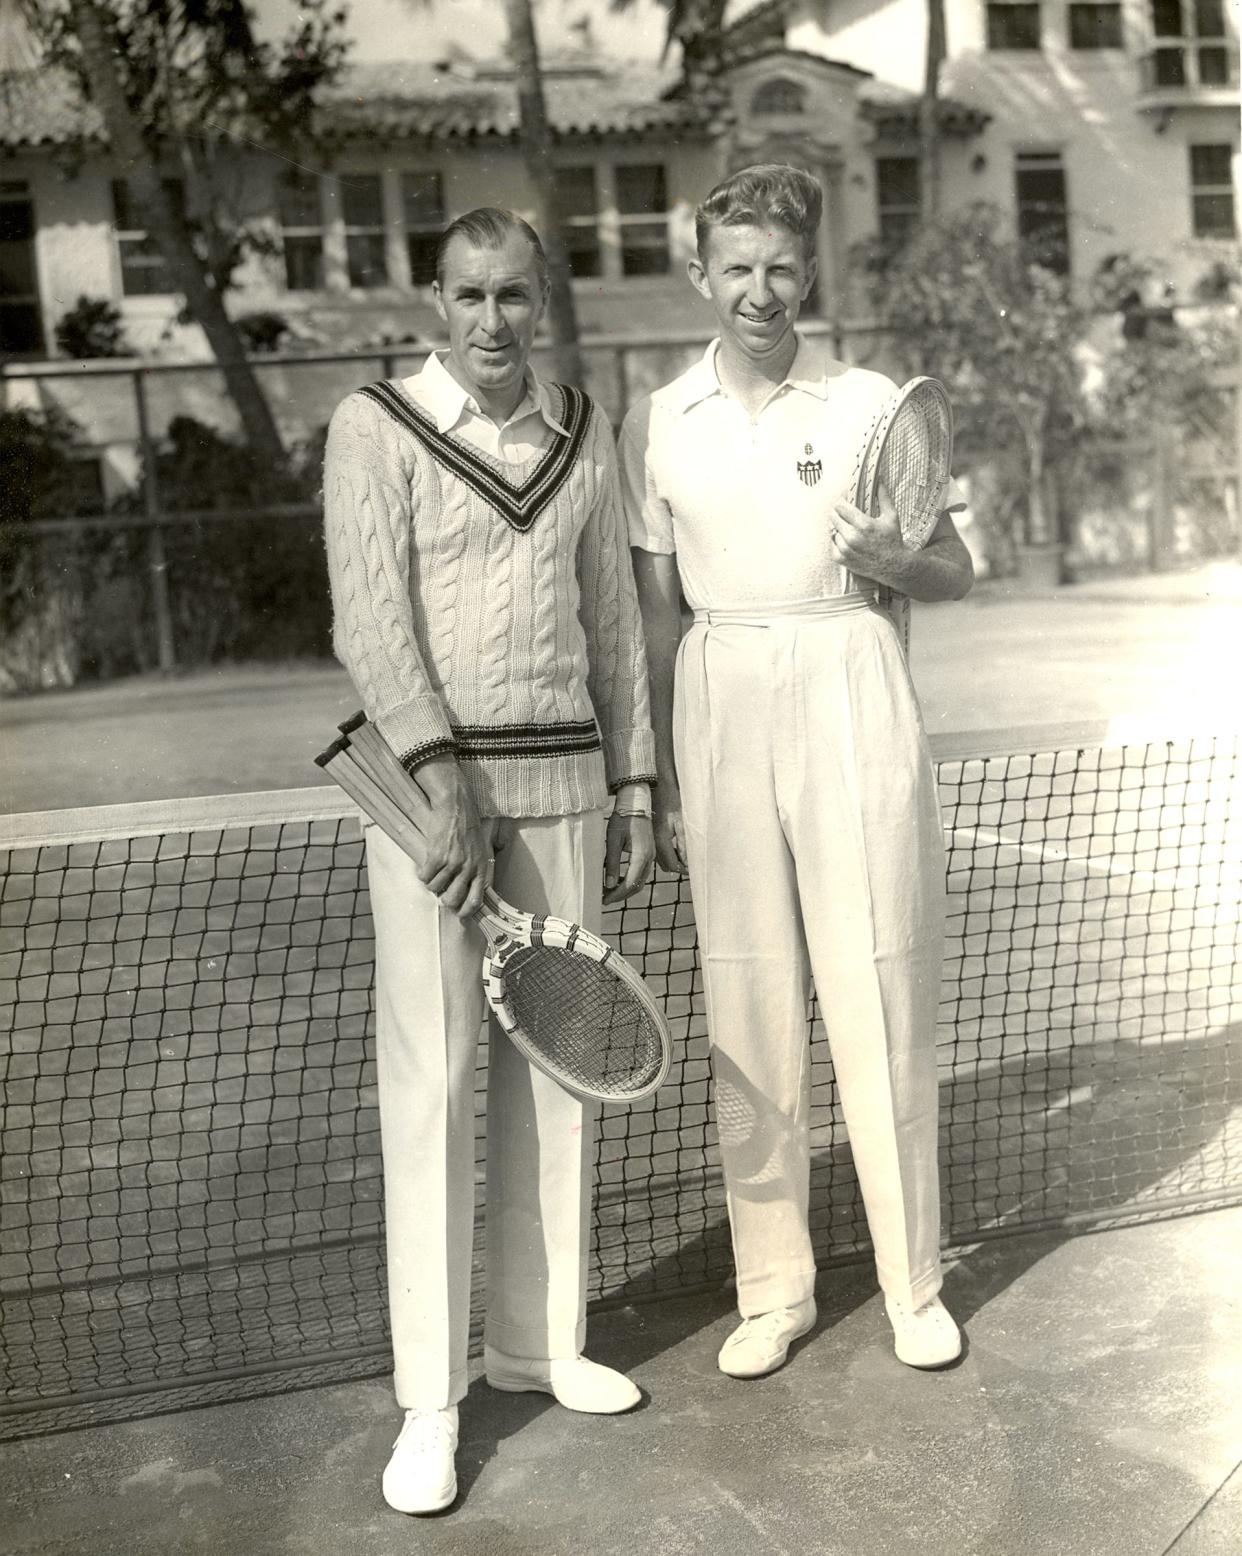 Tennis greats Bill Tilden, left, and Don Budge played in an exhibition at the Everglades Club in Palm Beach in 1940. Budge defeated Tilden, 22 years his elder, 6-3, 6-3, but Tilden was taken by how many people attended the match. 'But see how they still turn out (for me)?' he is reported to have said. 'Probably expecting to see me topple over.'